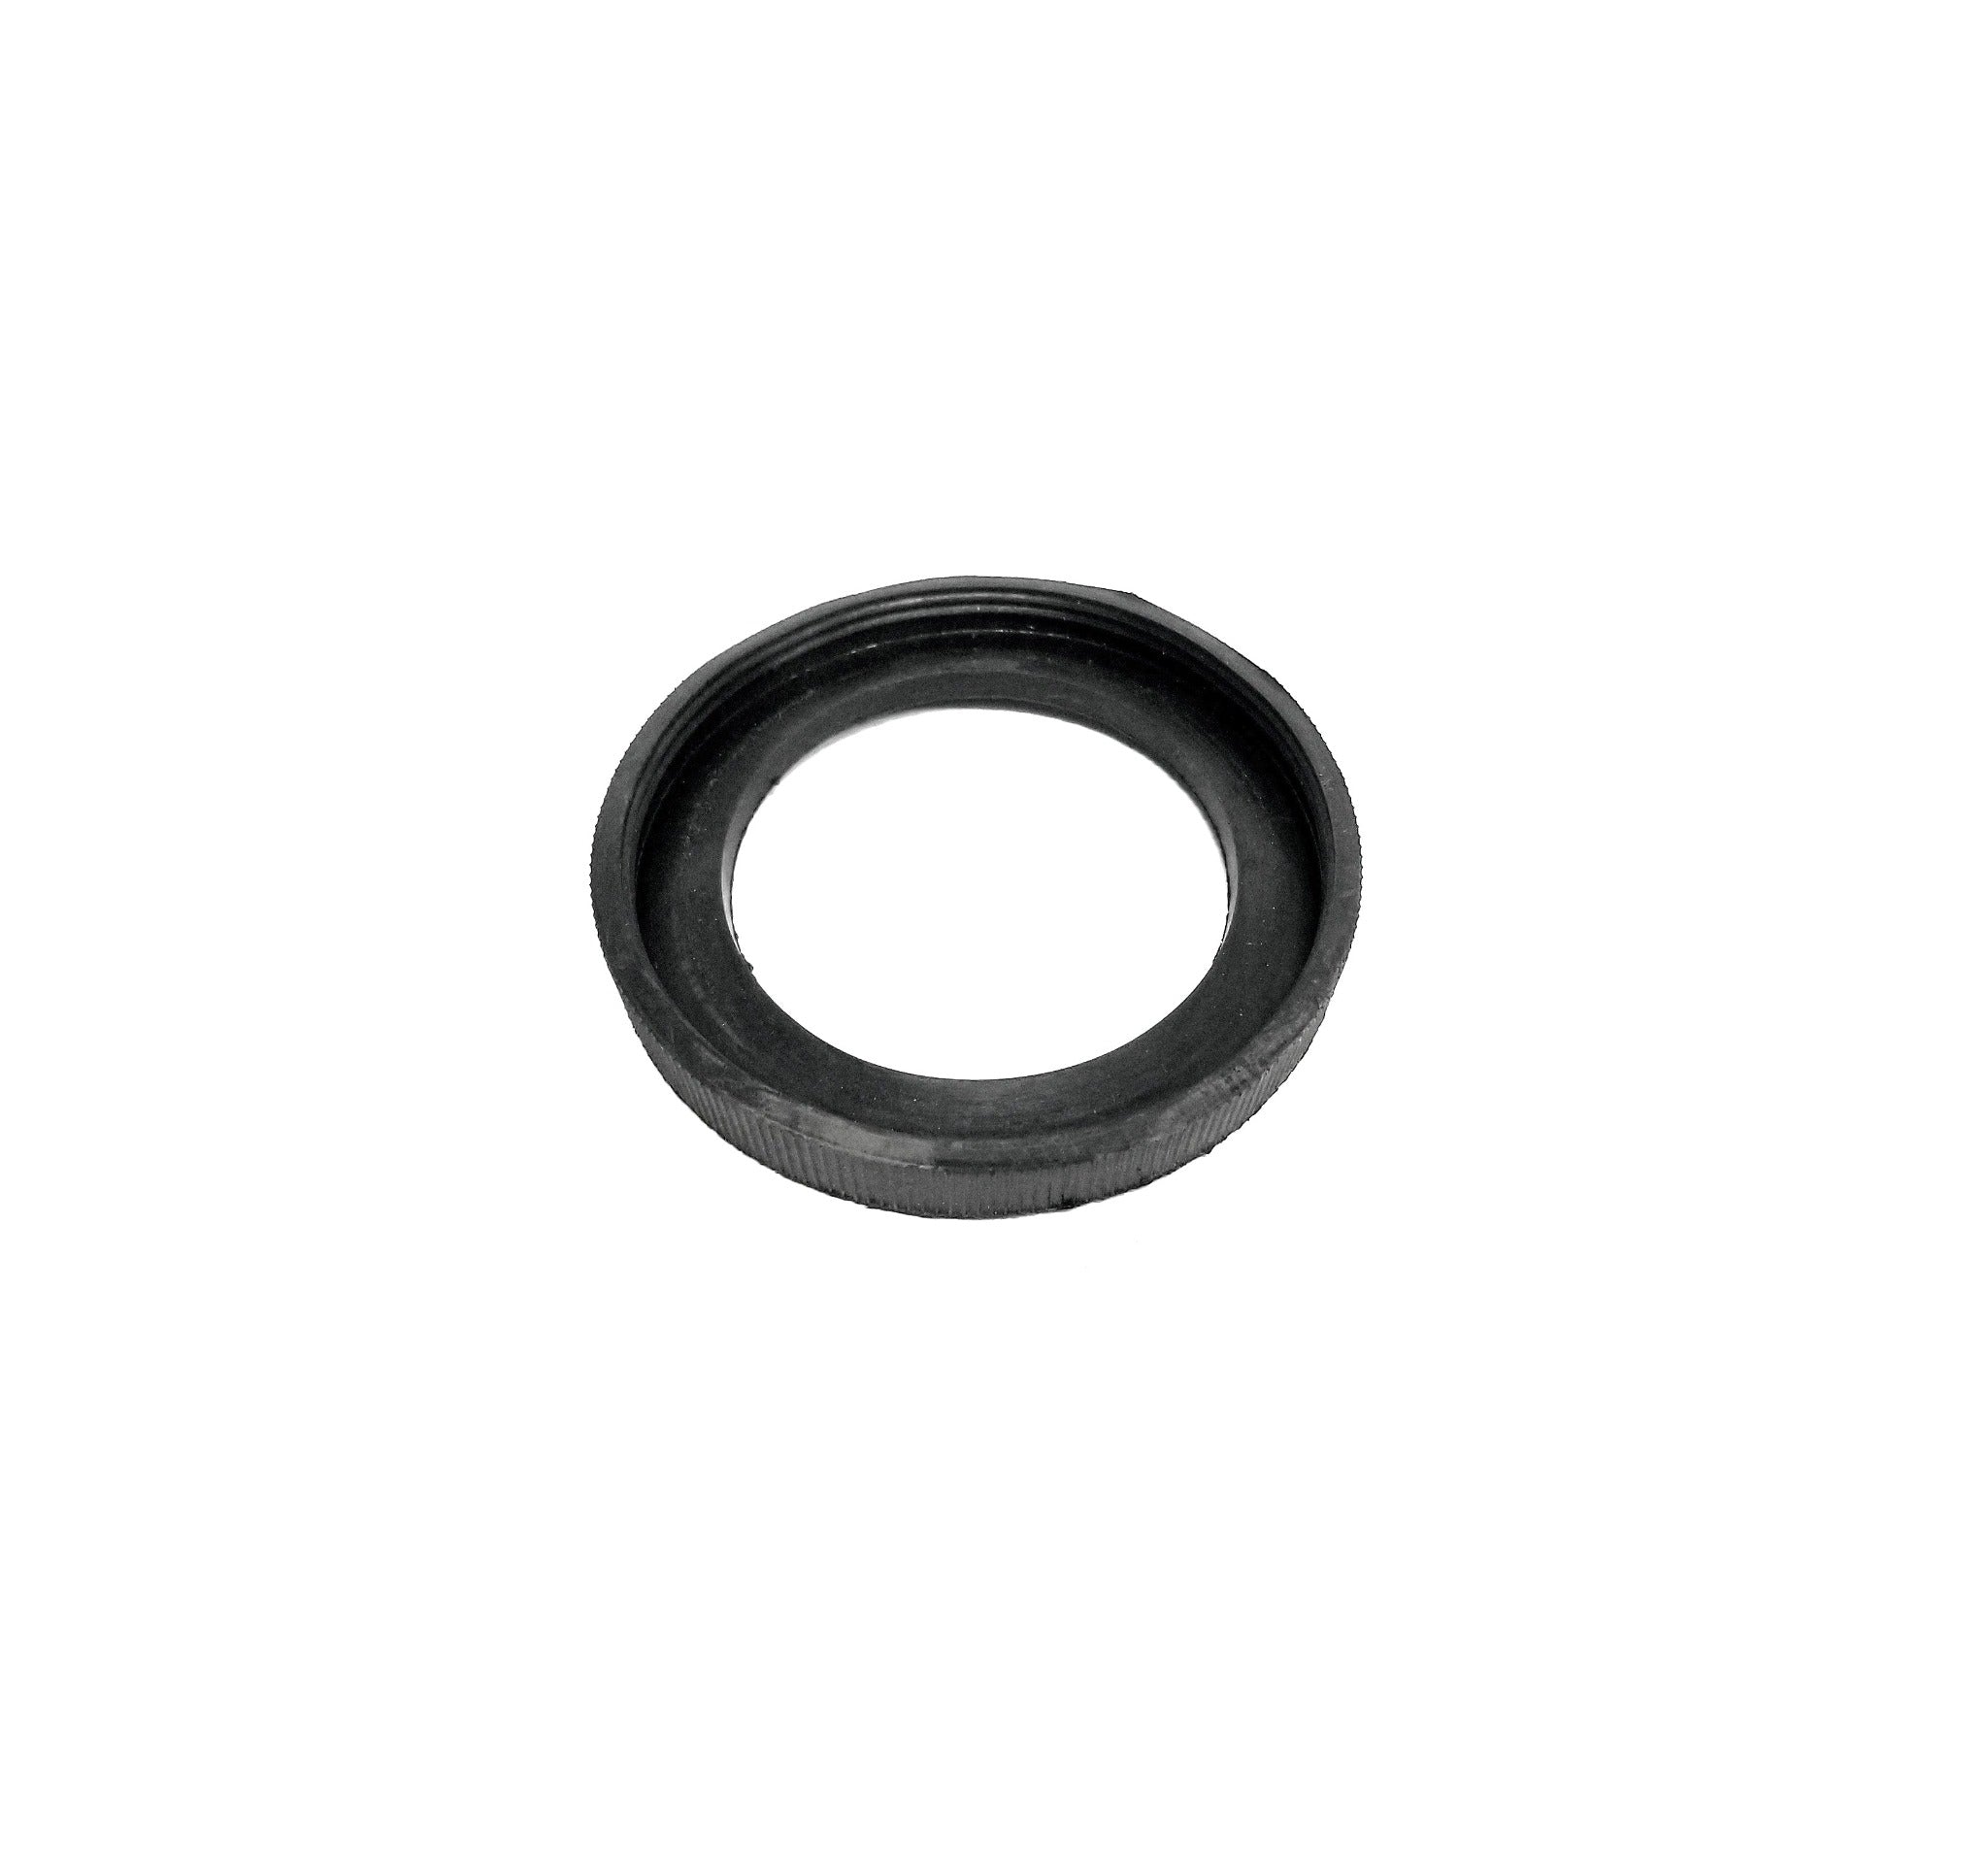 Rubber Ring for Balancer Cup 4.5"